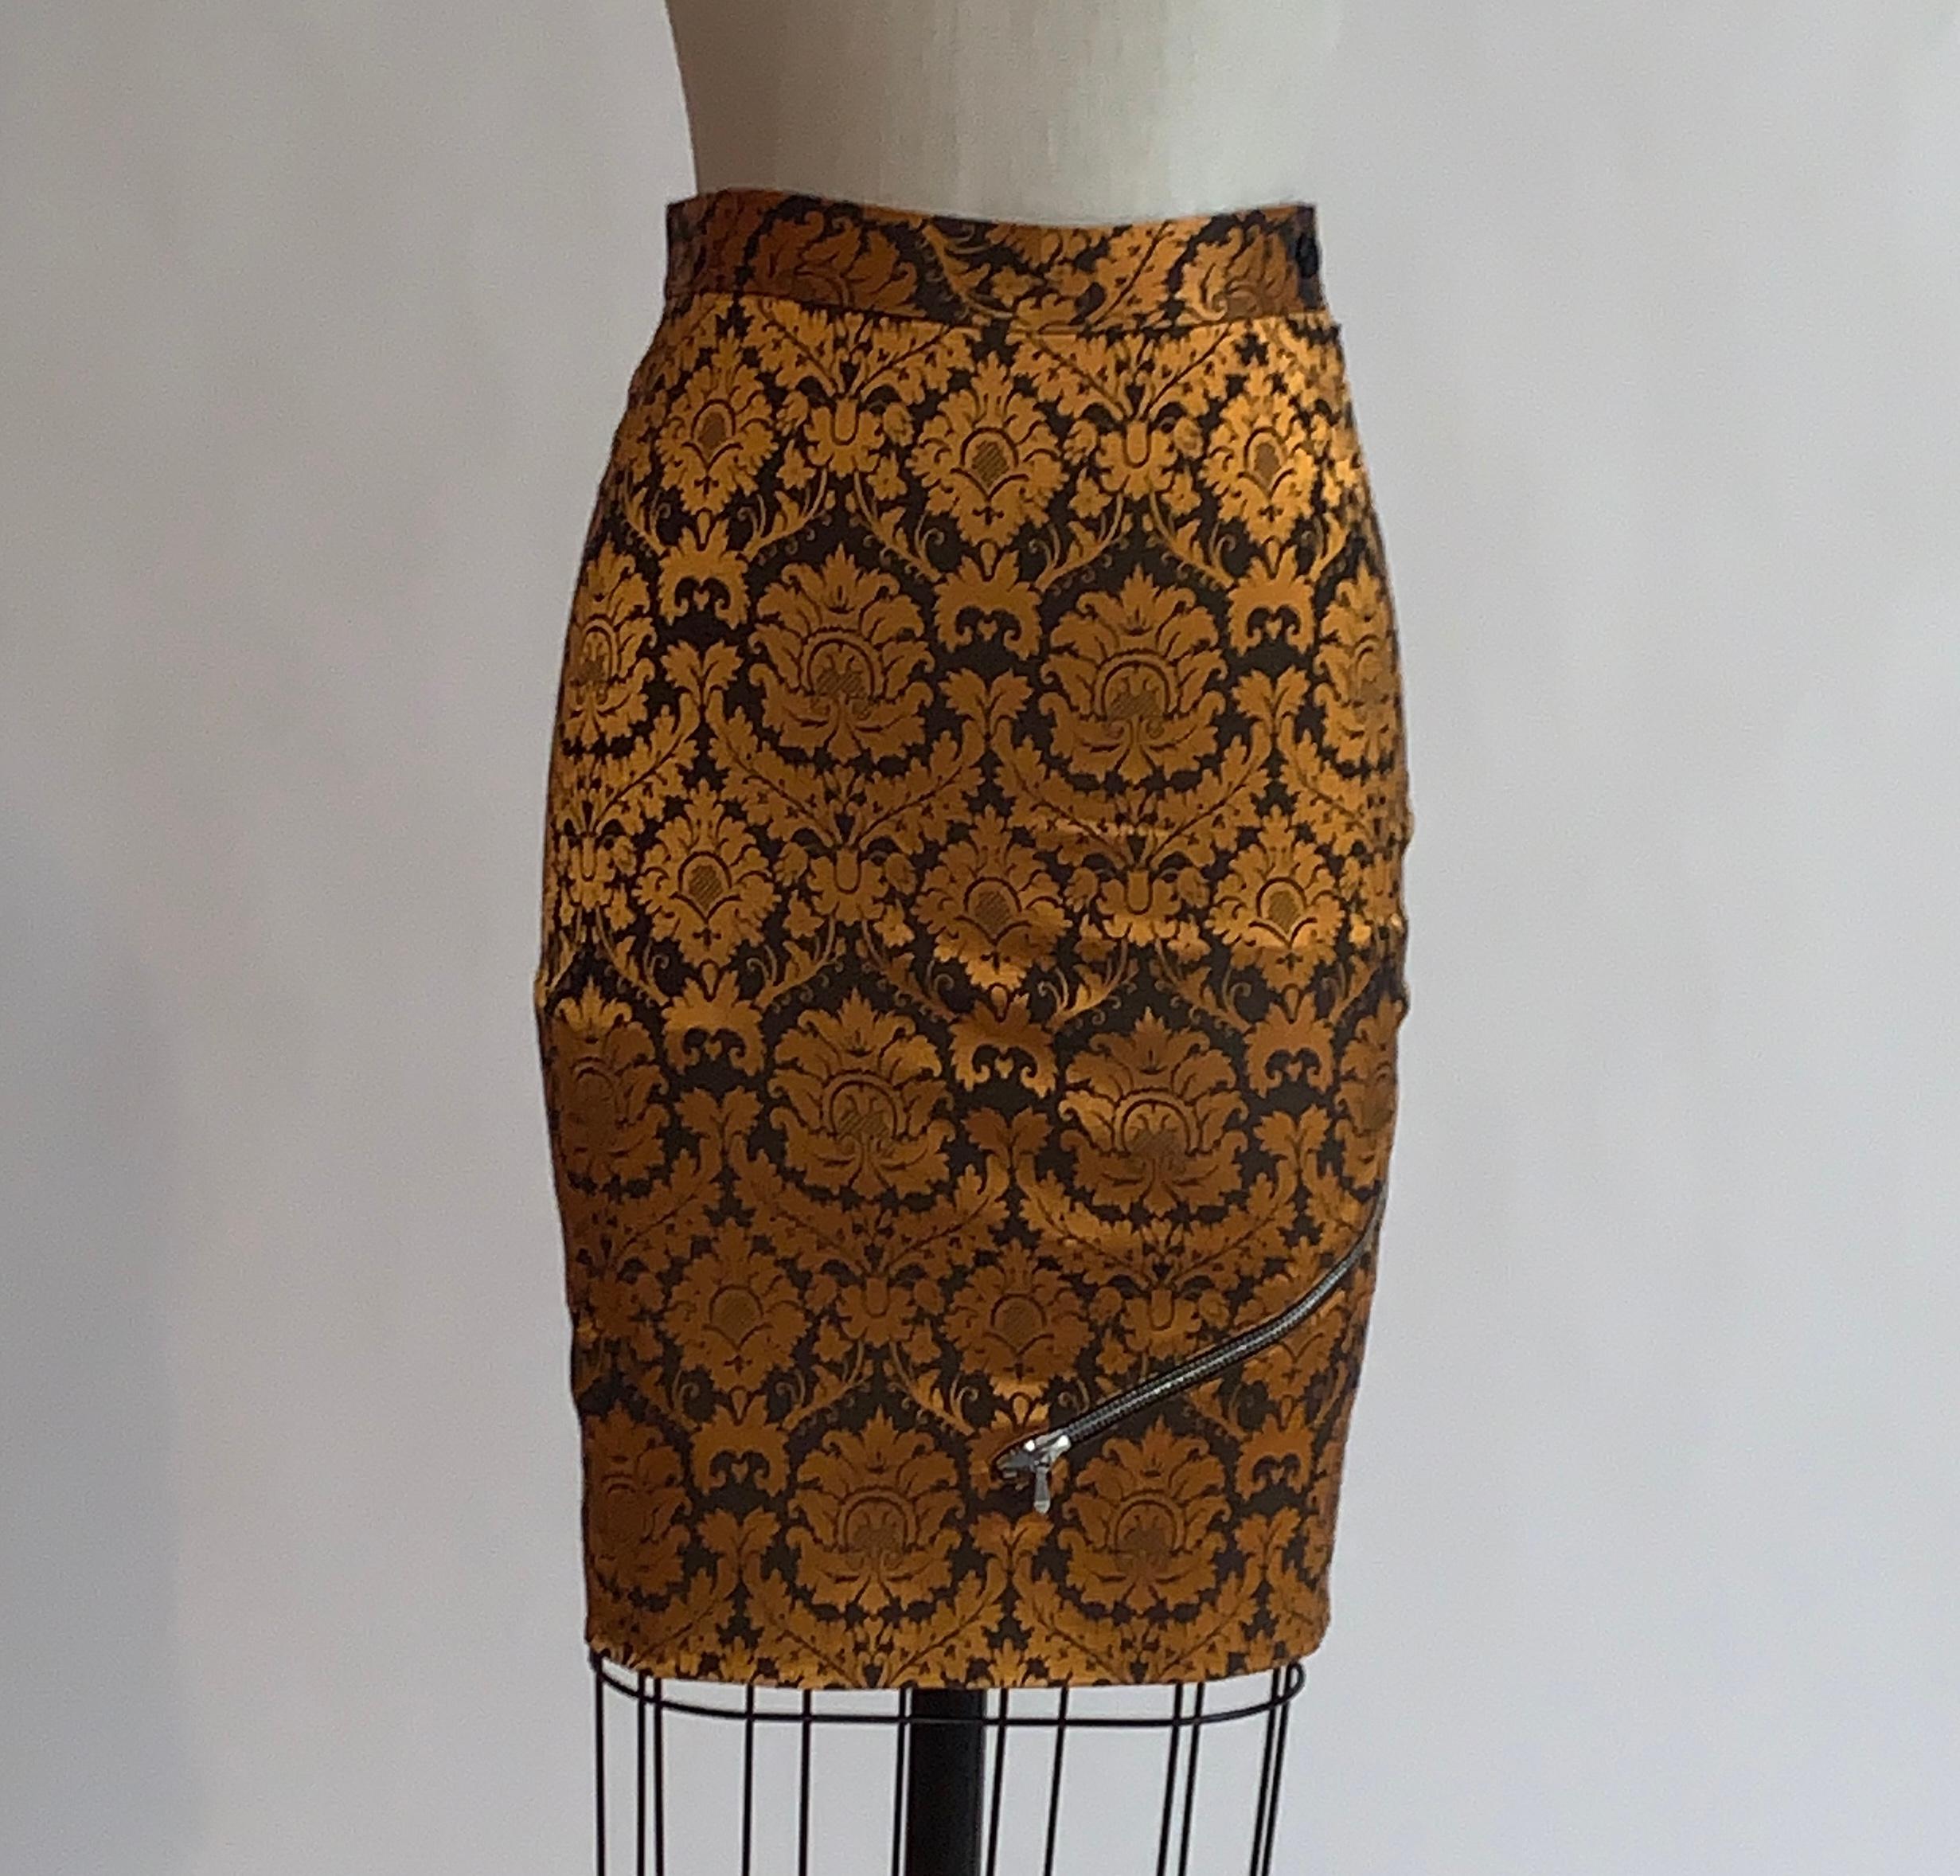 Alexander McQueen orange and brown brocade pencil skirt, midi version shown in look 18 of the Spring 1997 runway show La Poupee. Working zipper detail wraps from front to back. Side zip with button and snap at waist.

68% acetate, 20% cotton, 4%